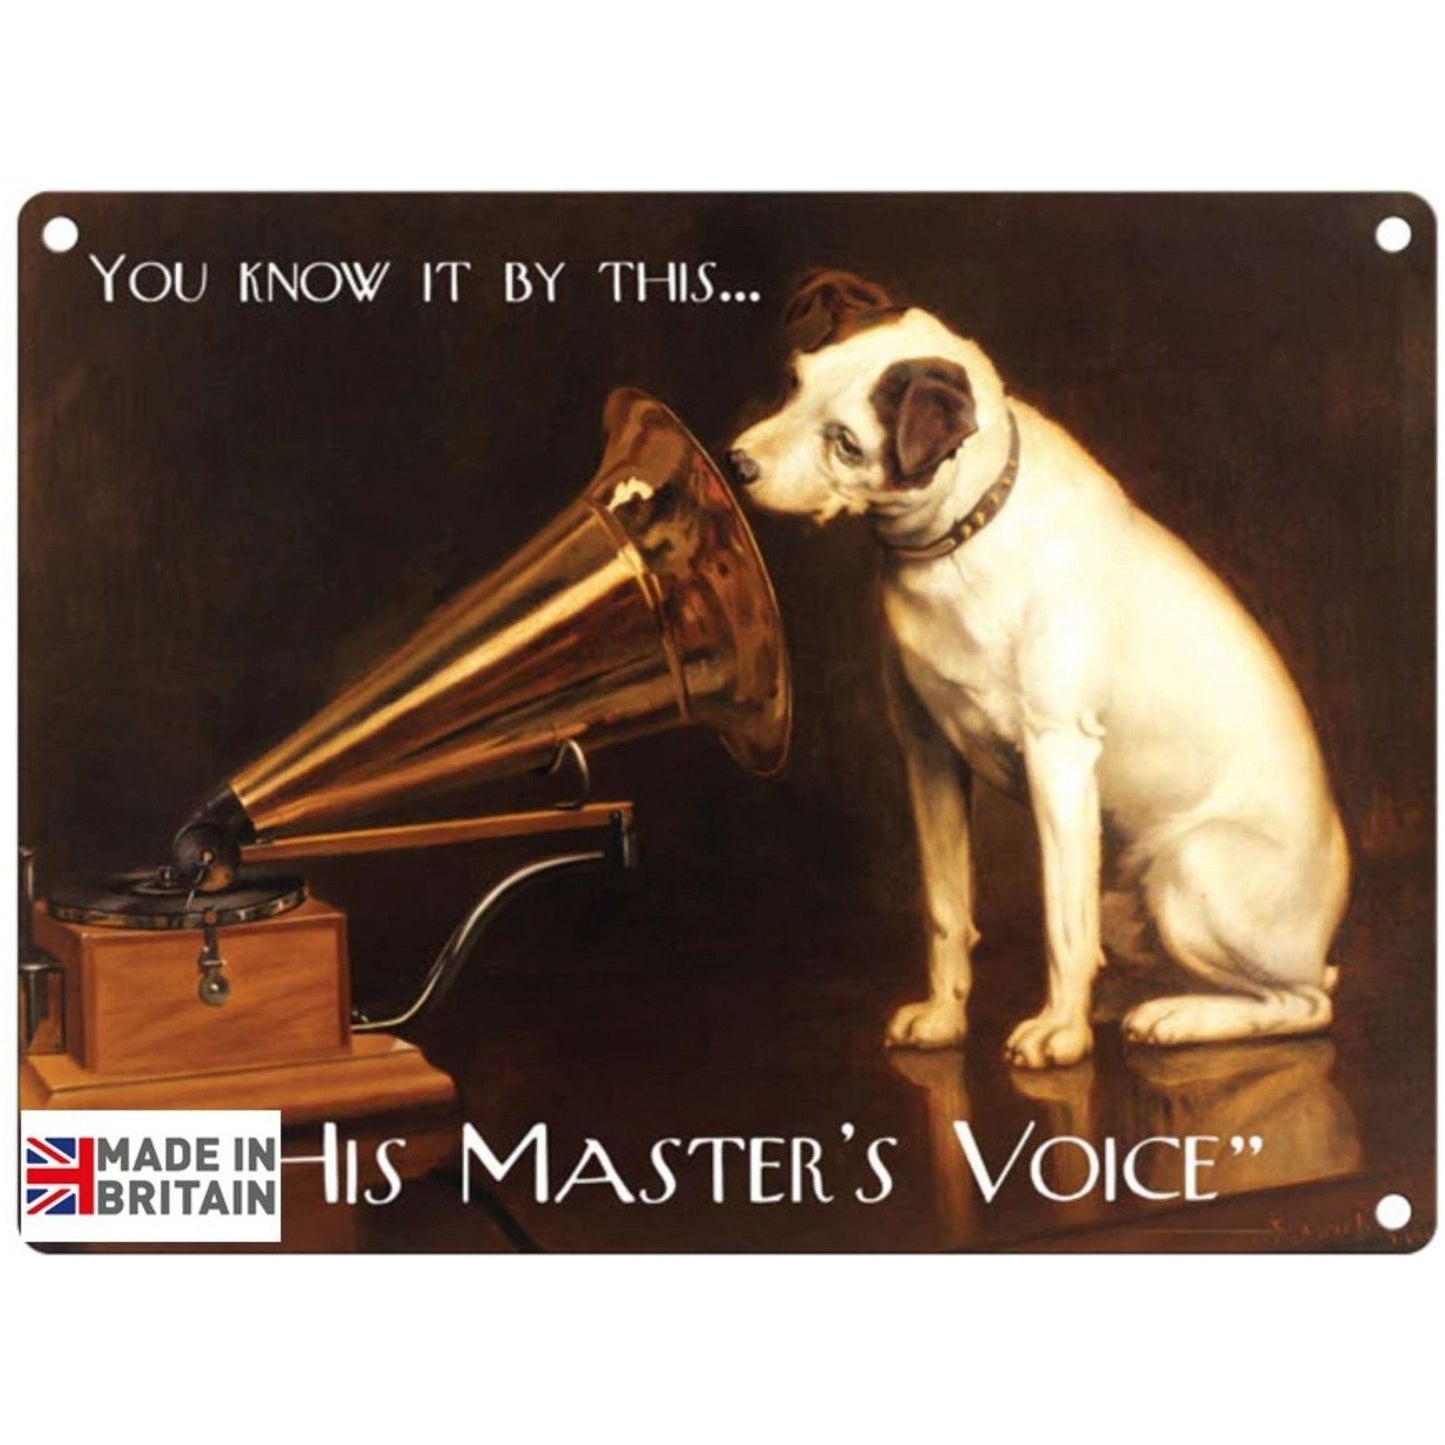 Small Metal Sign 45 x 37.5cm Vintage Retro His Master's Voice - Ashton and Finch